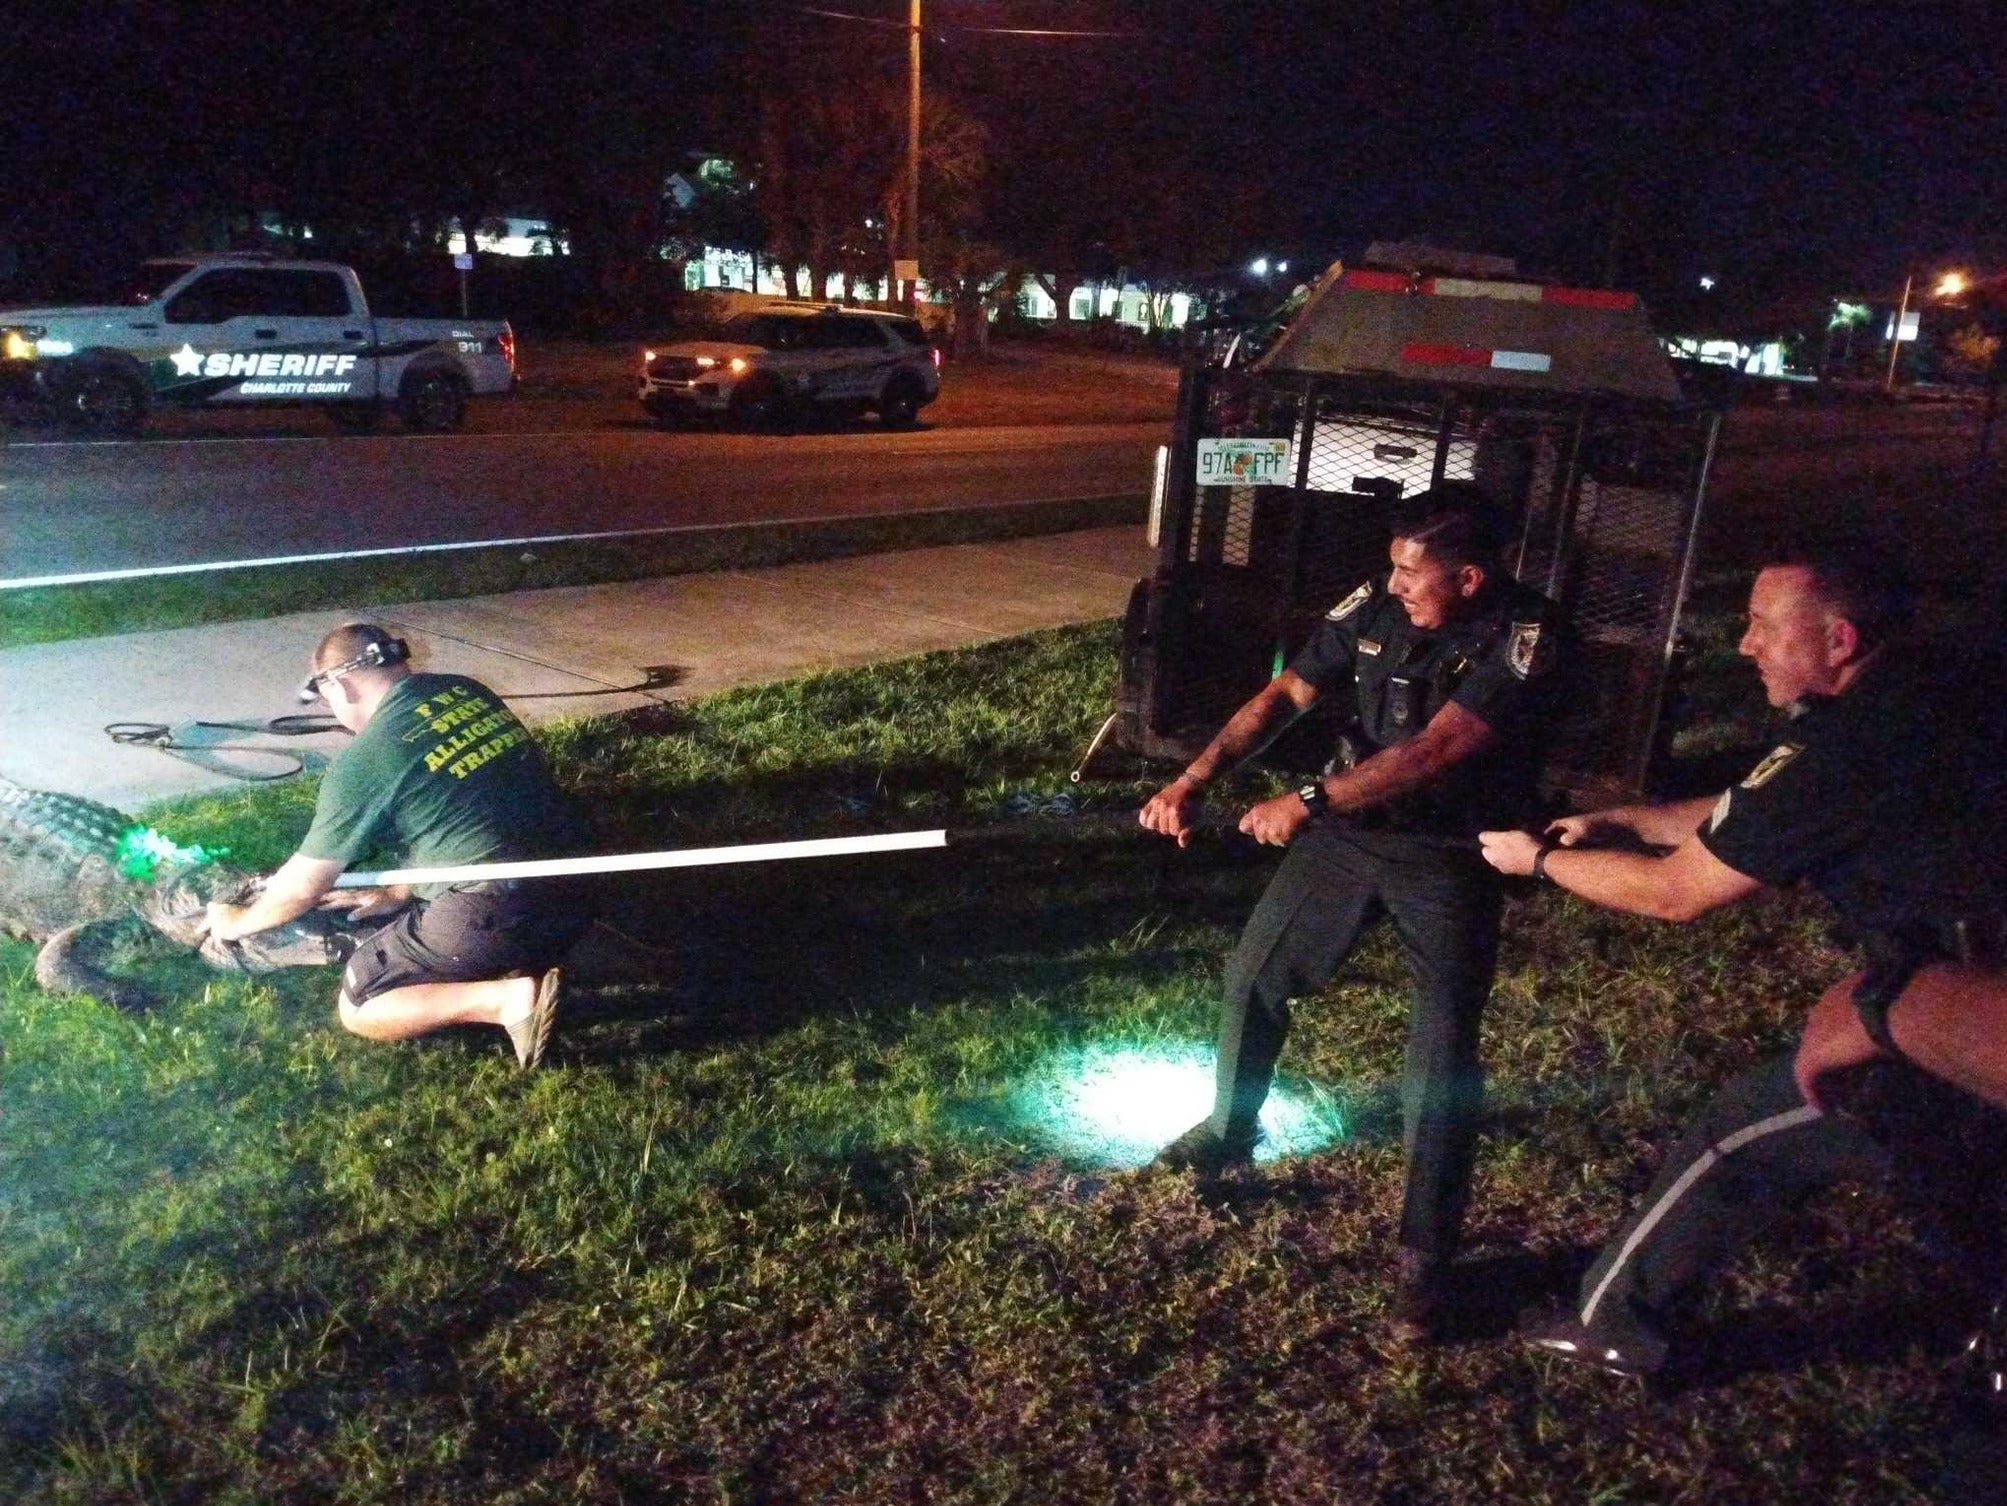 The alligator was caught by multiple agencies